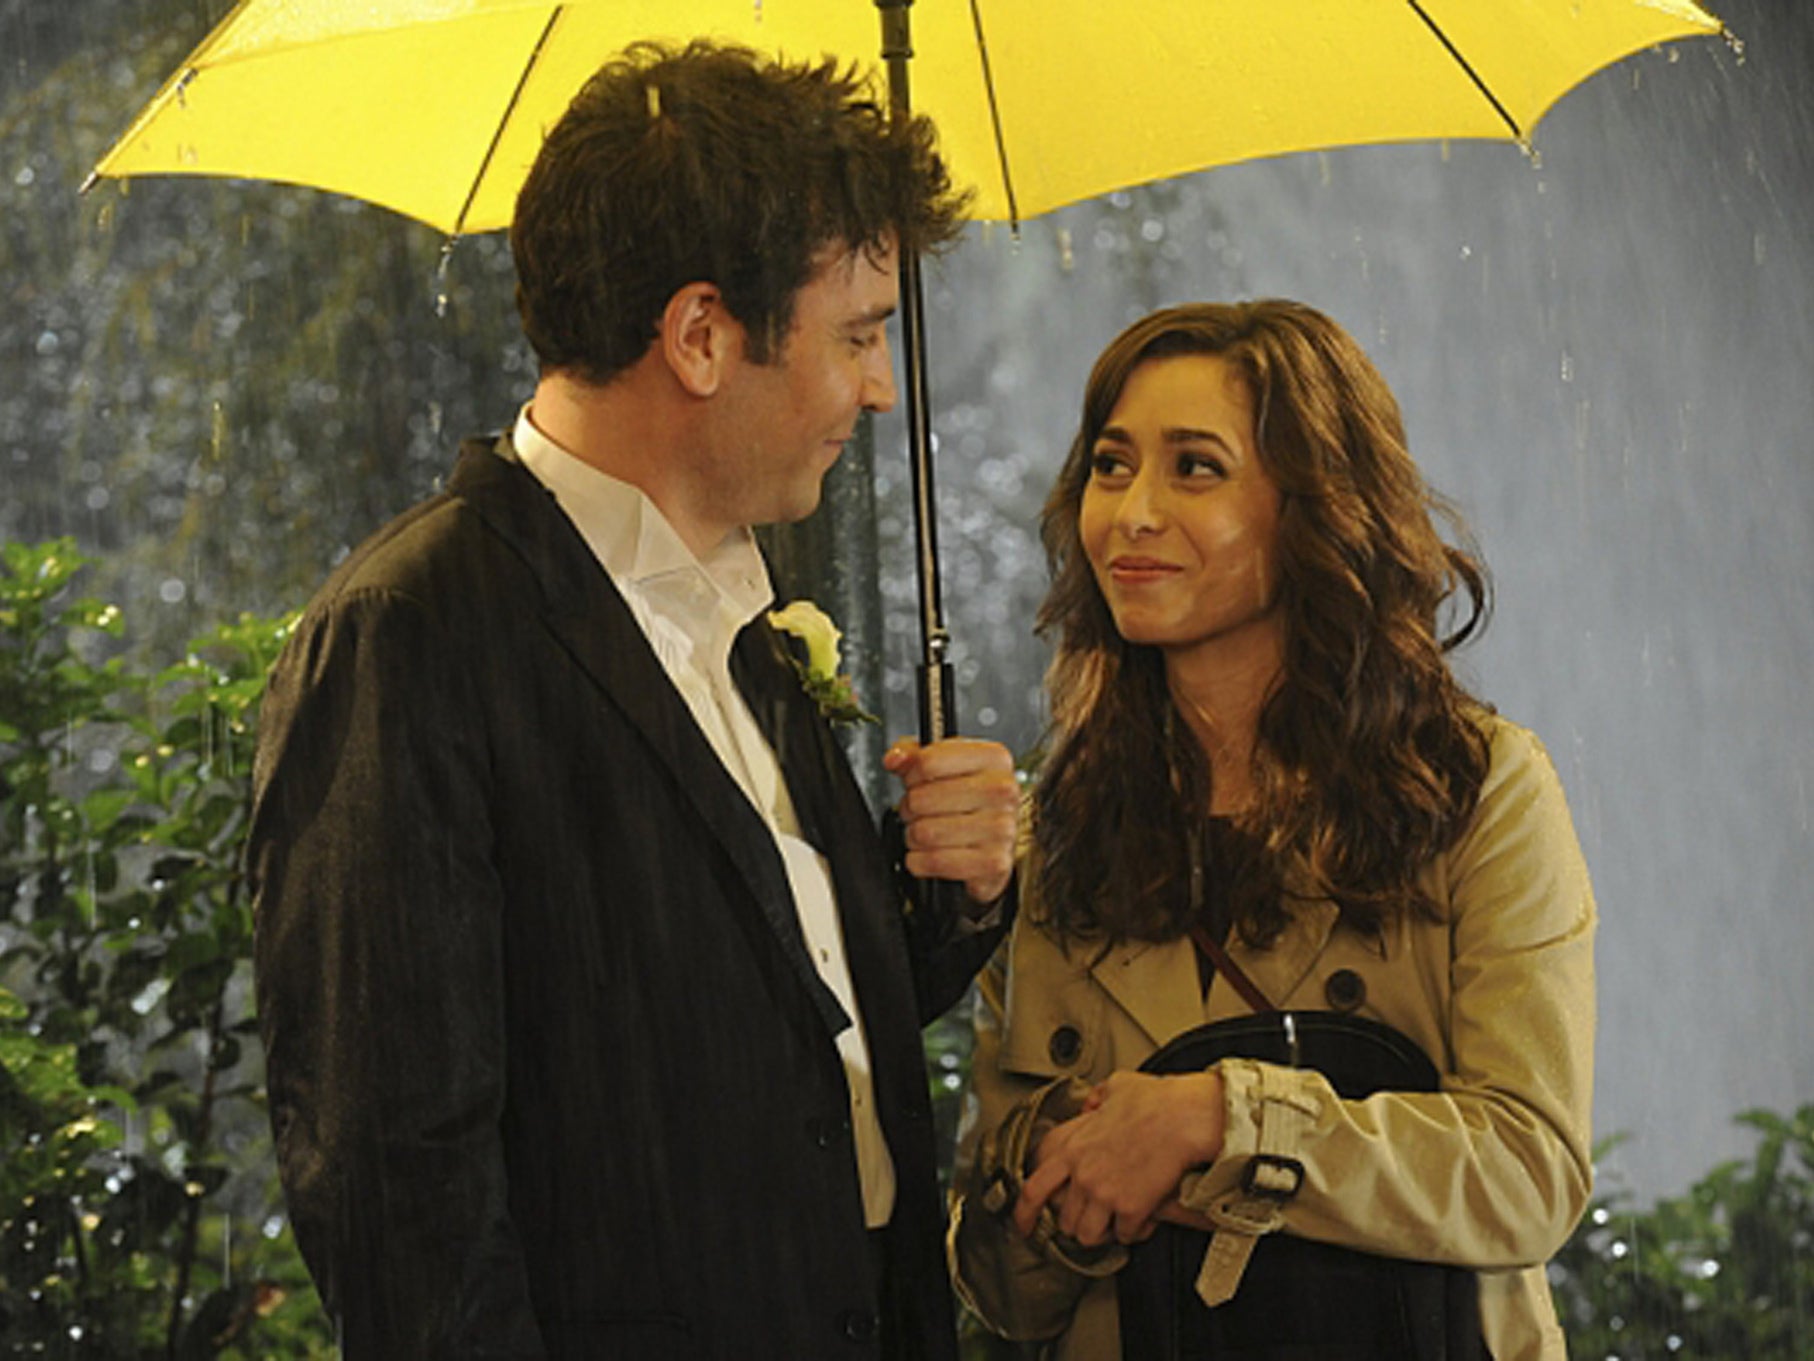 Seasons one to eight of How I Met Your Mother will soon be available for your streaming pleasure